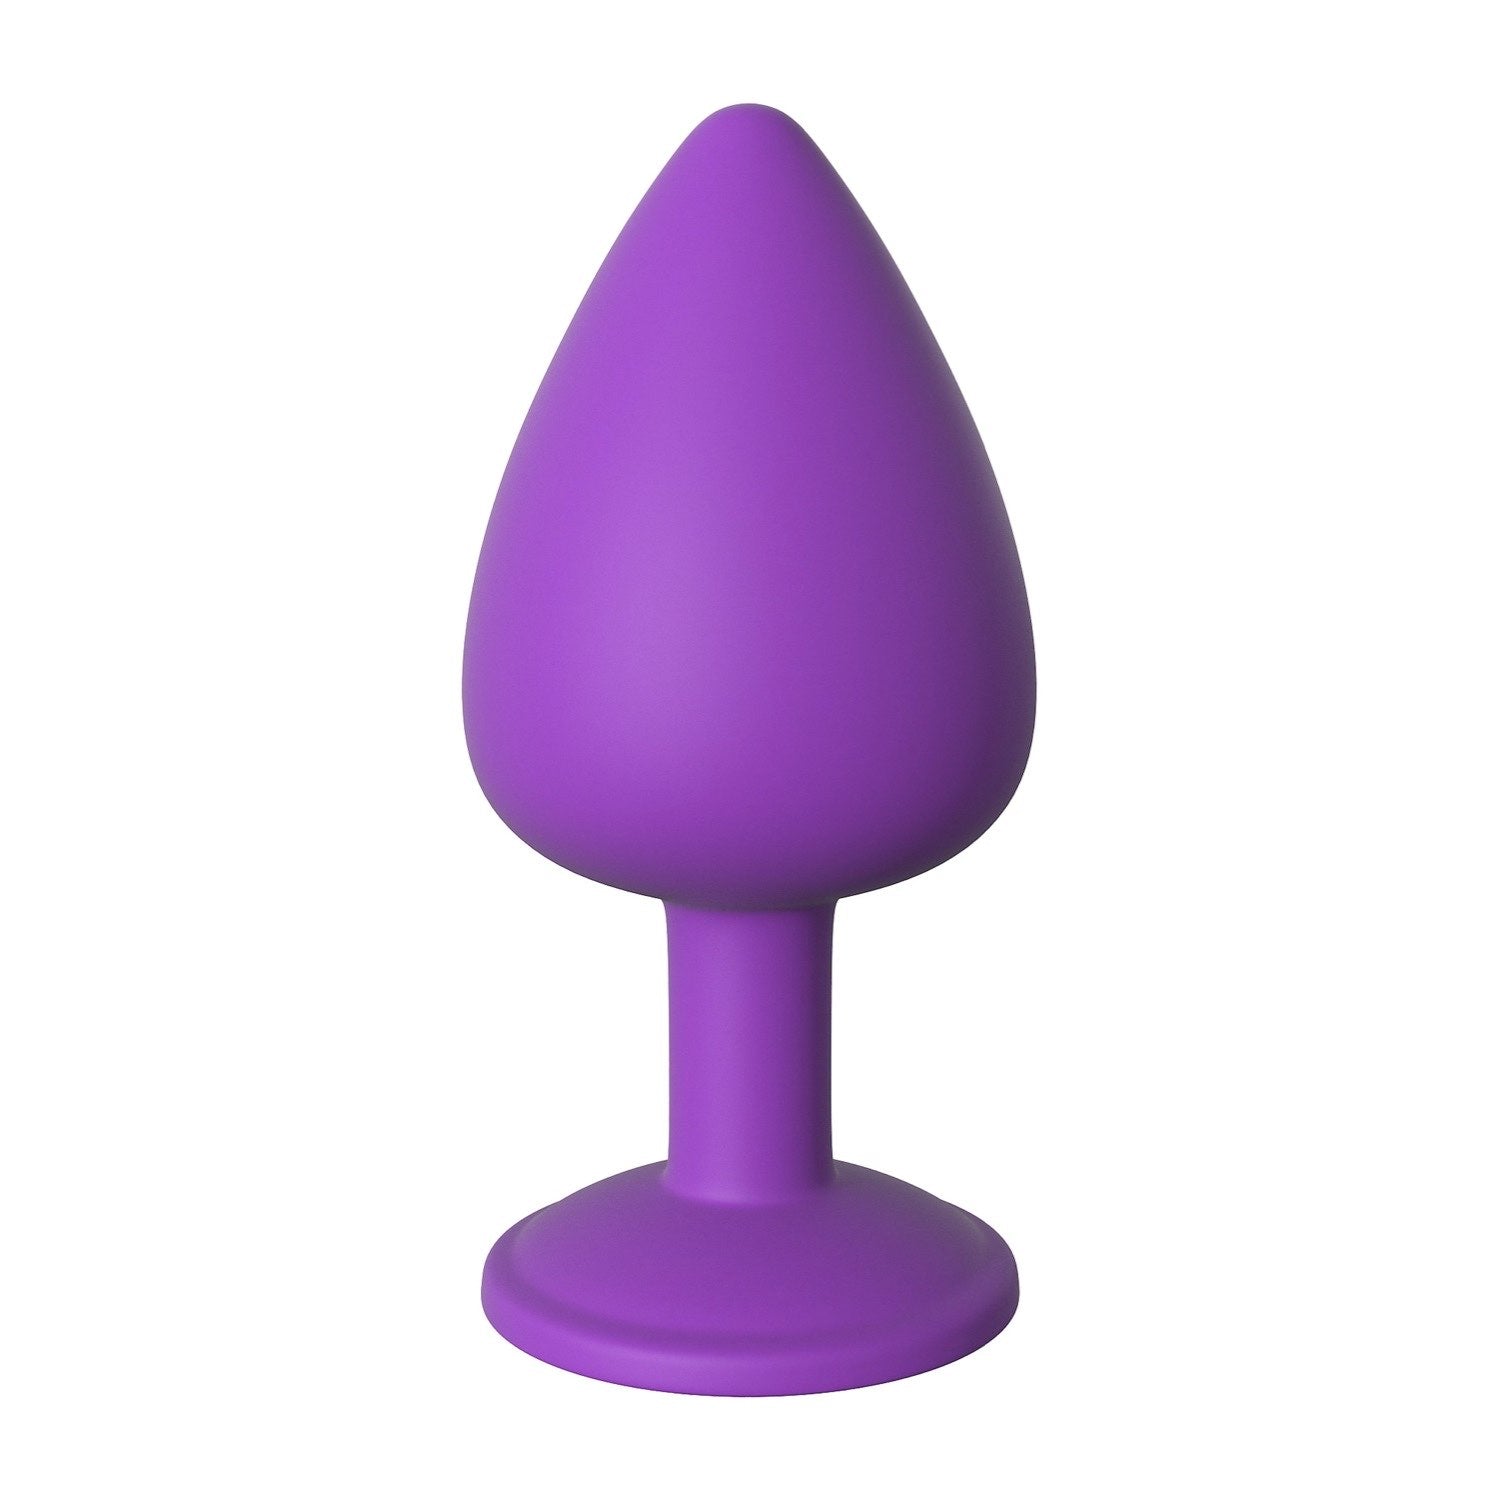 Fantasy For Her Little Gem Large Plug - Purple 9.6 cm Butt Plug with Jewel Base by Pipedream